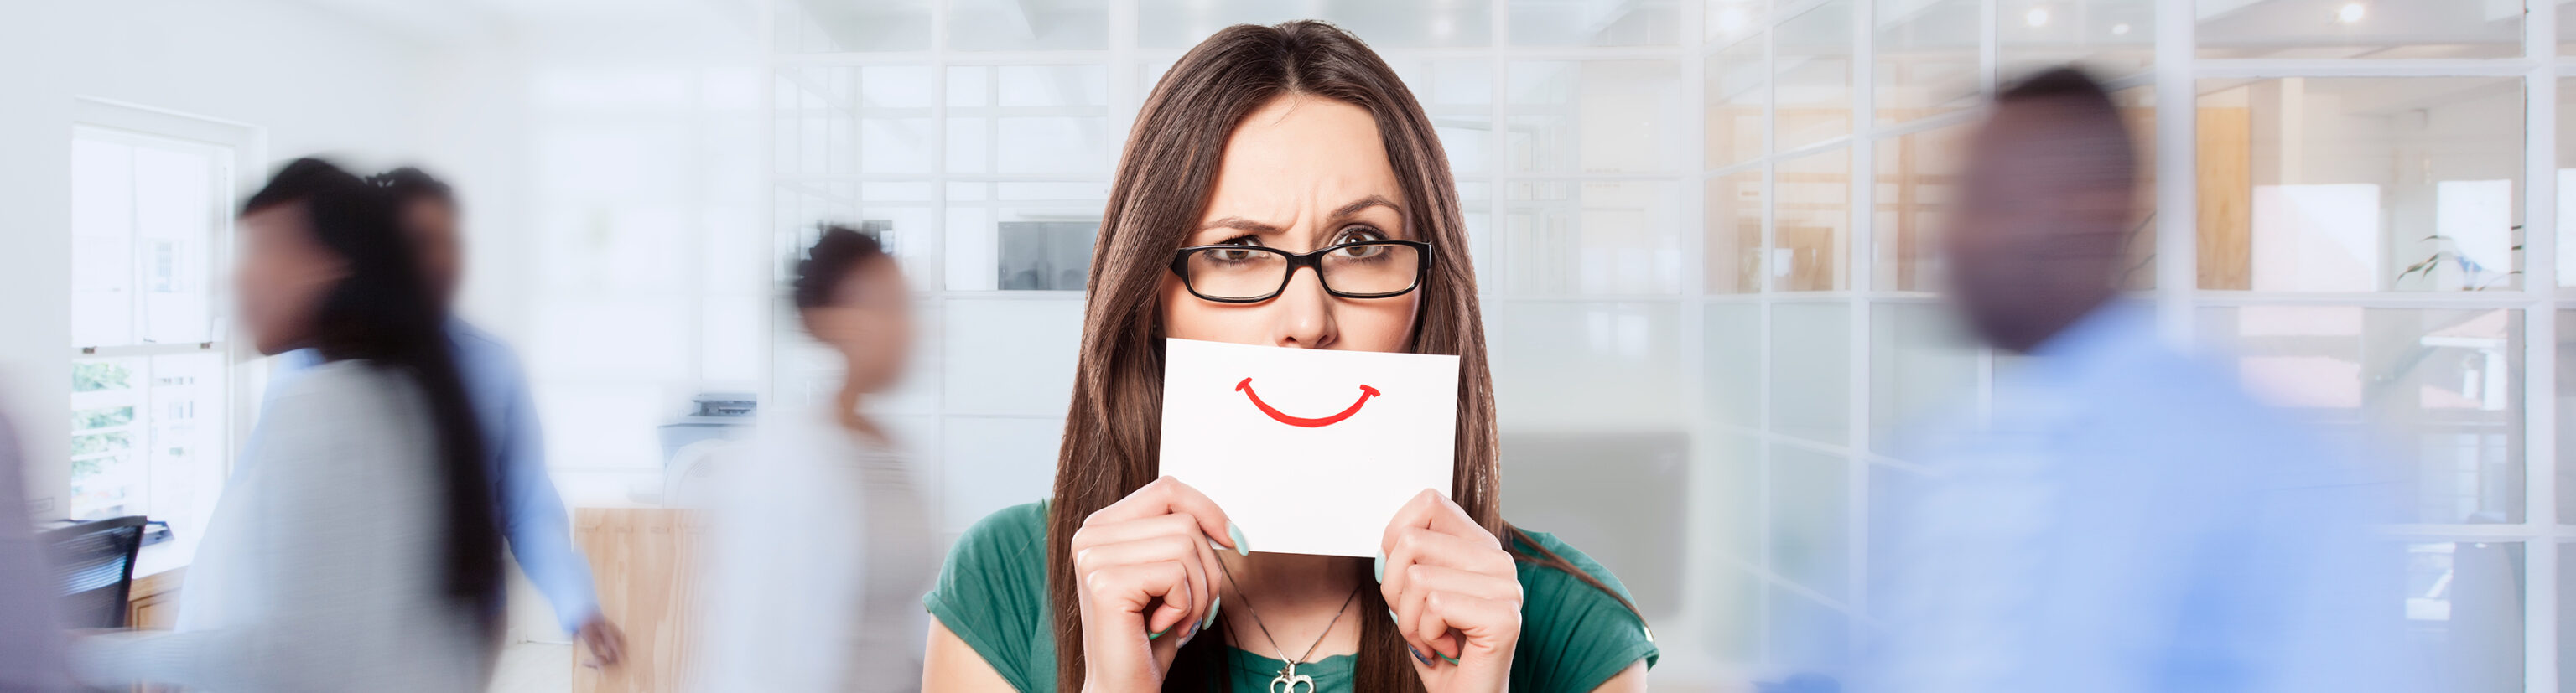 A distressed woman in an office with toxic positivity holds a smiley face on a card over her mouth